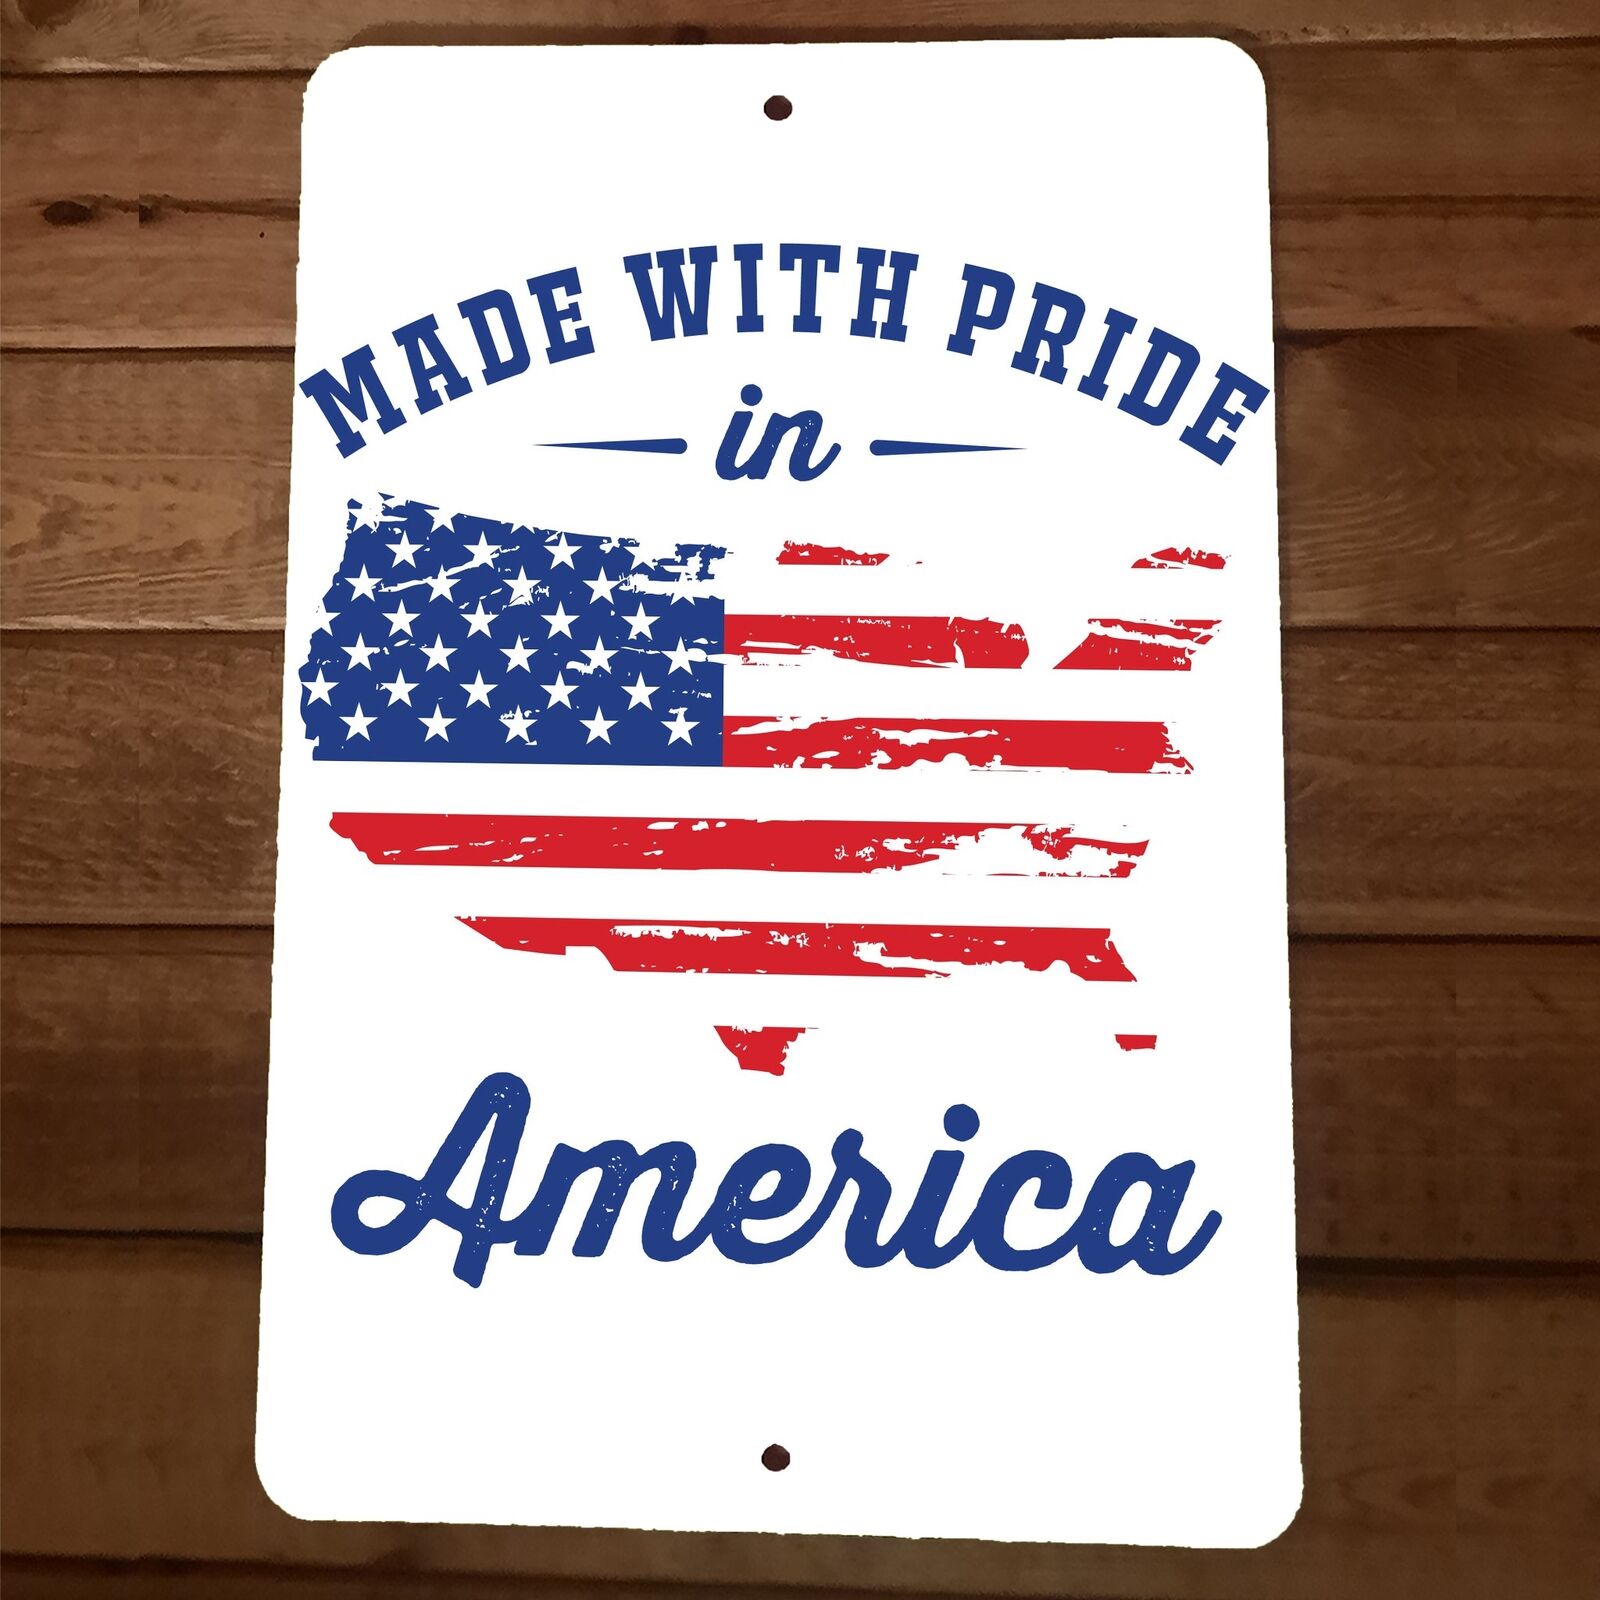 American Pride in the Products that are Made in the USA